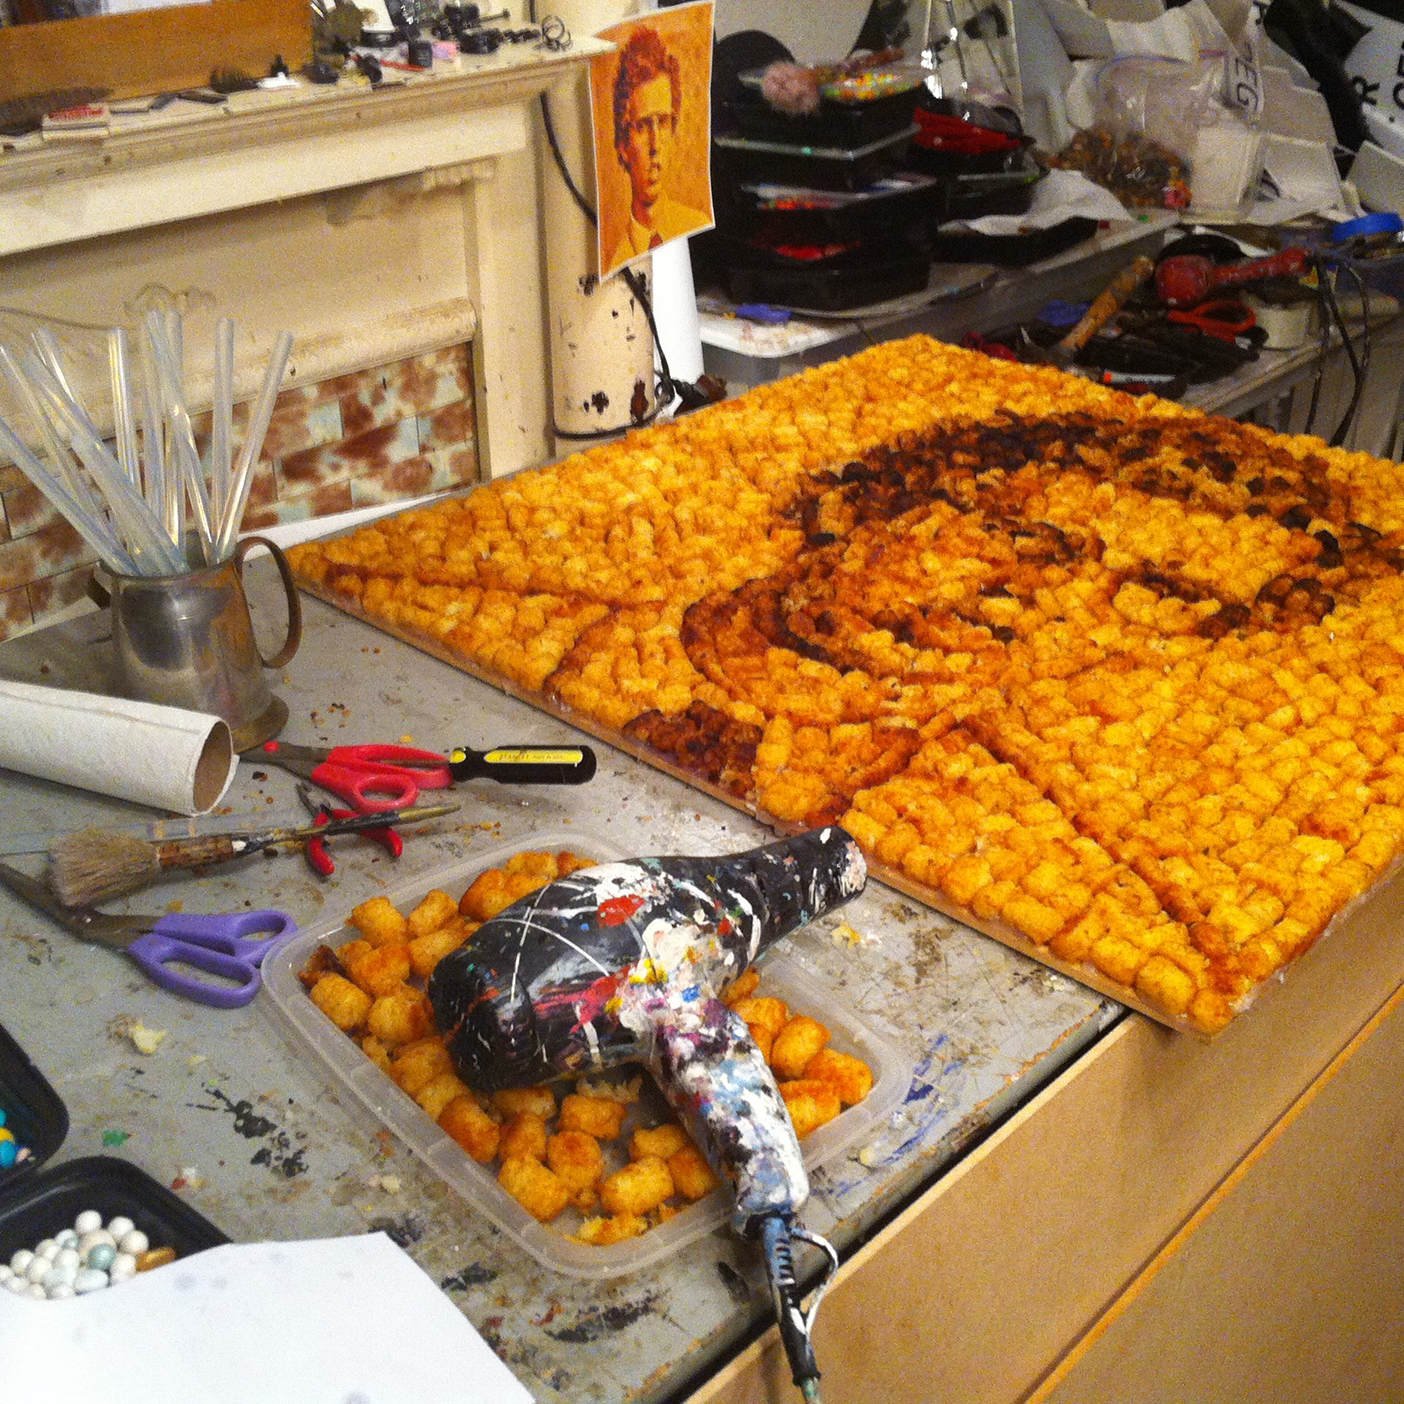 Photo from the process of making the cover art showing Napoleon Dynamite made out of tater tots. This shot shows the final image in the background and hot-glue guns and loose tots in the foreground.